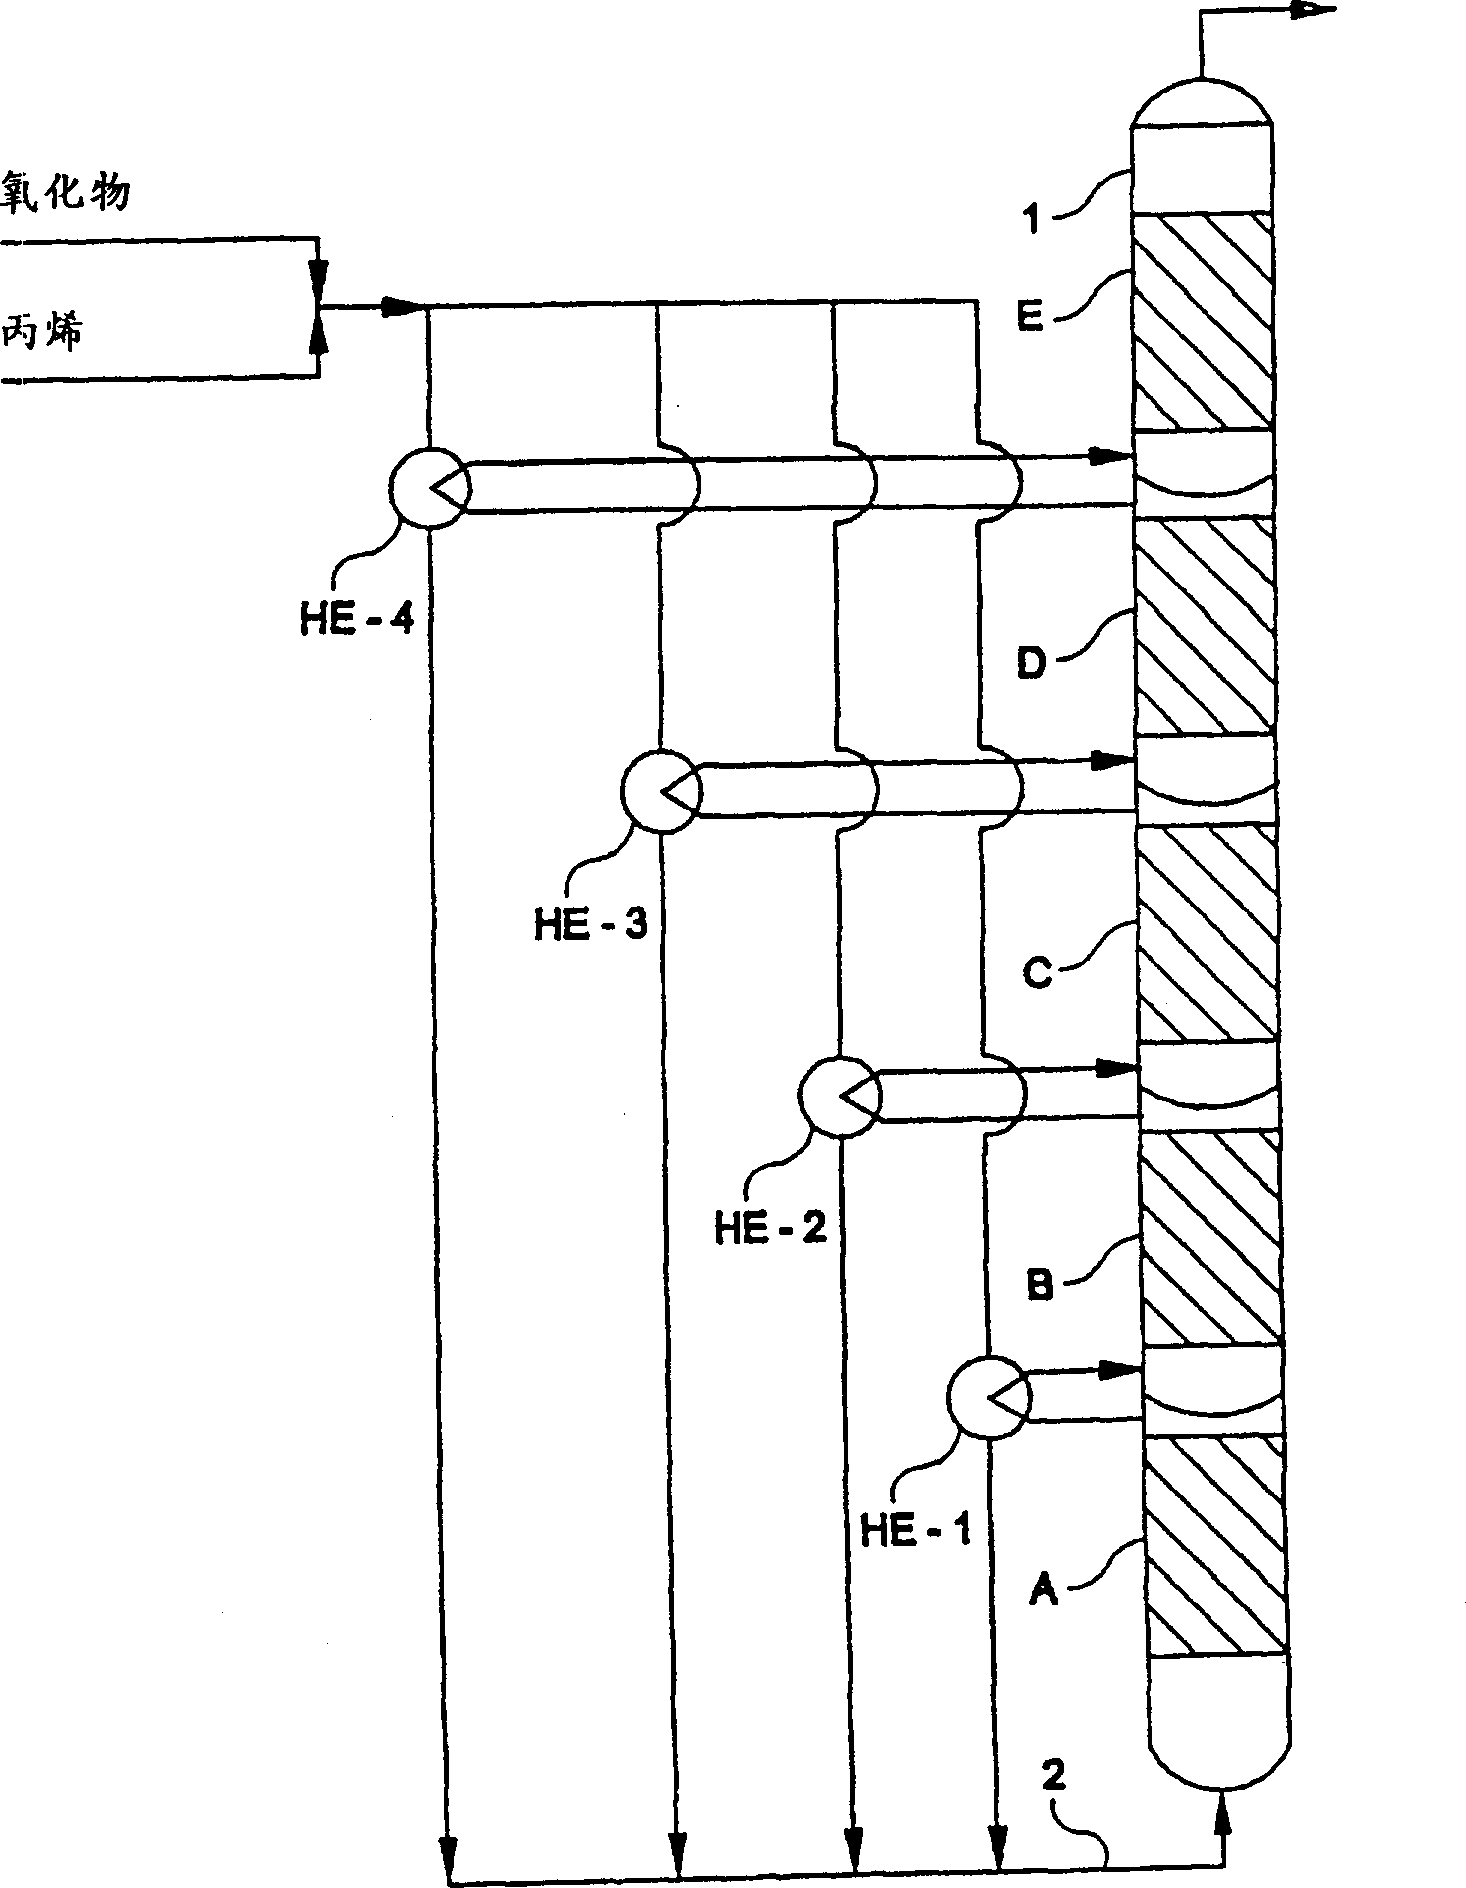 Epoxidation process using serially connected cascade of fixed bed reactors